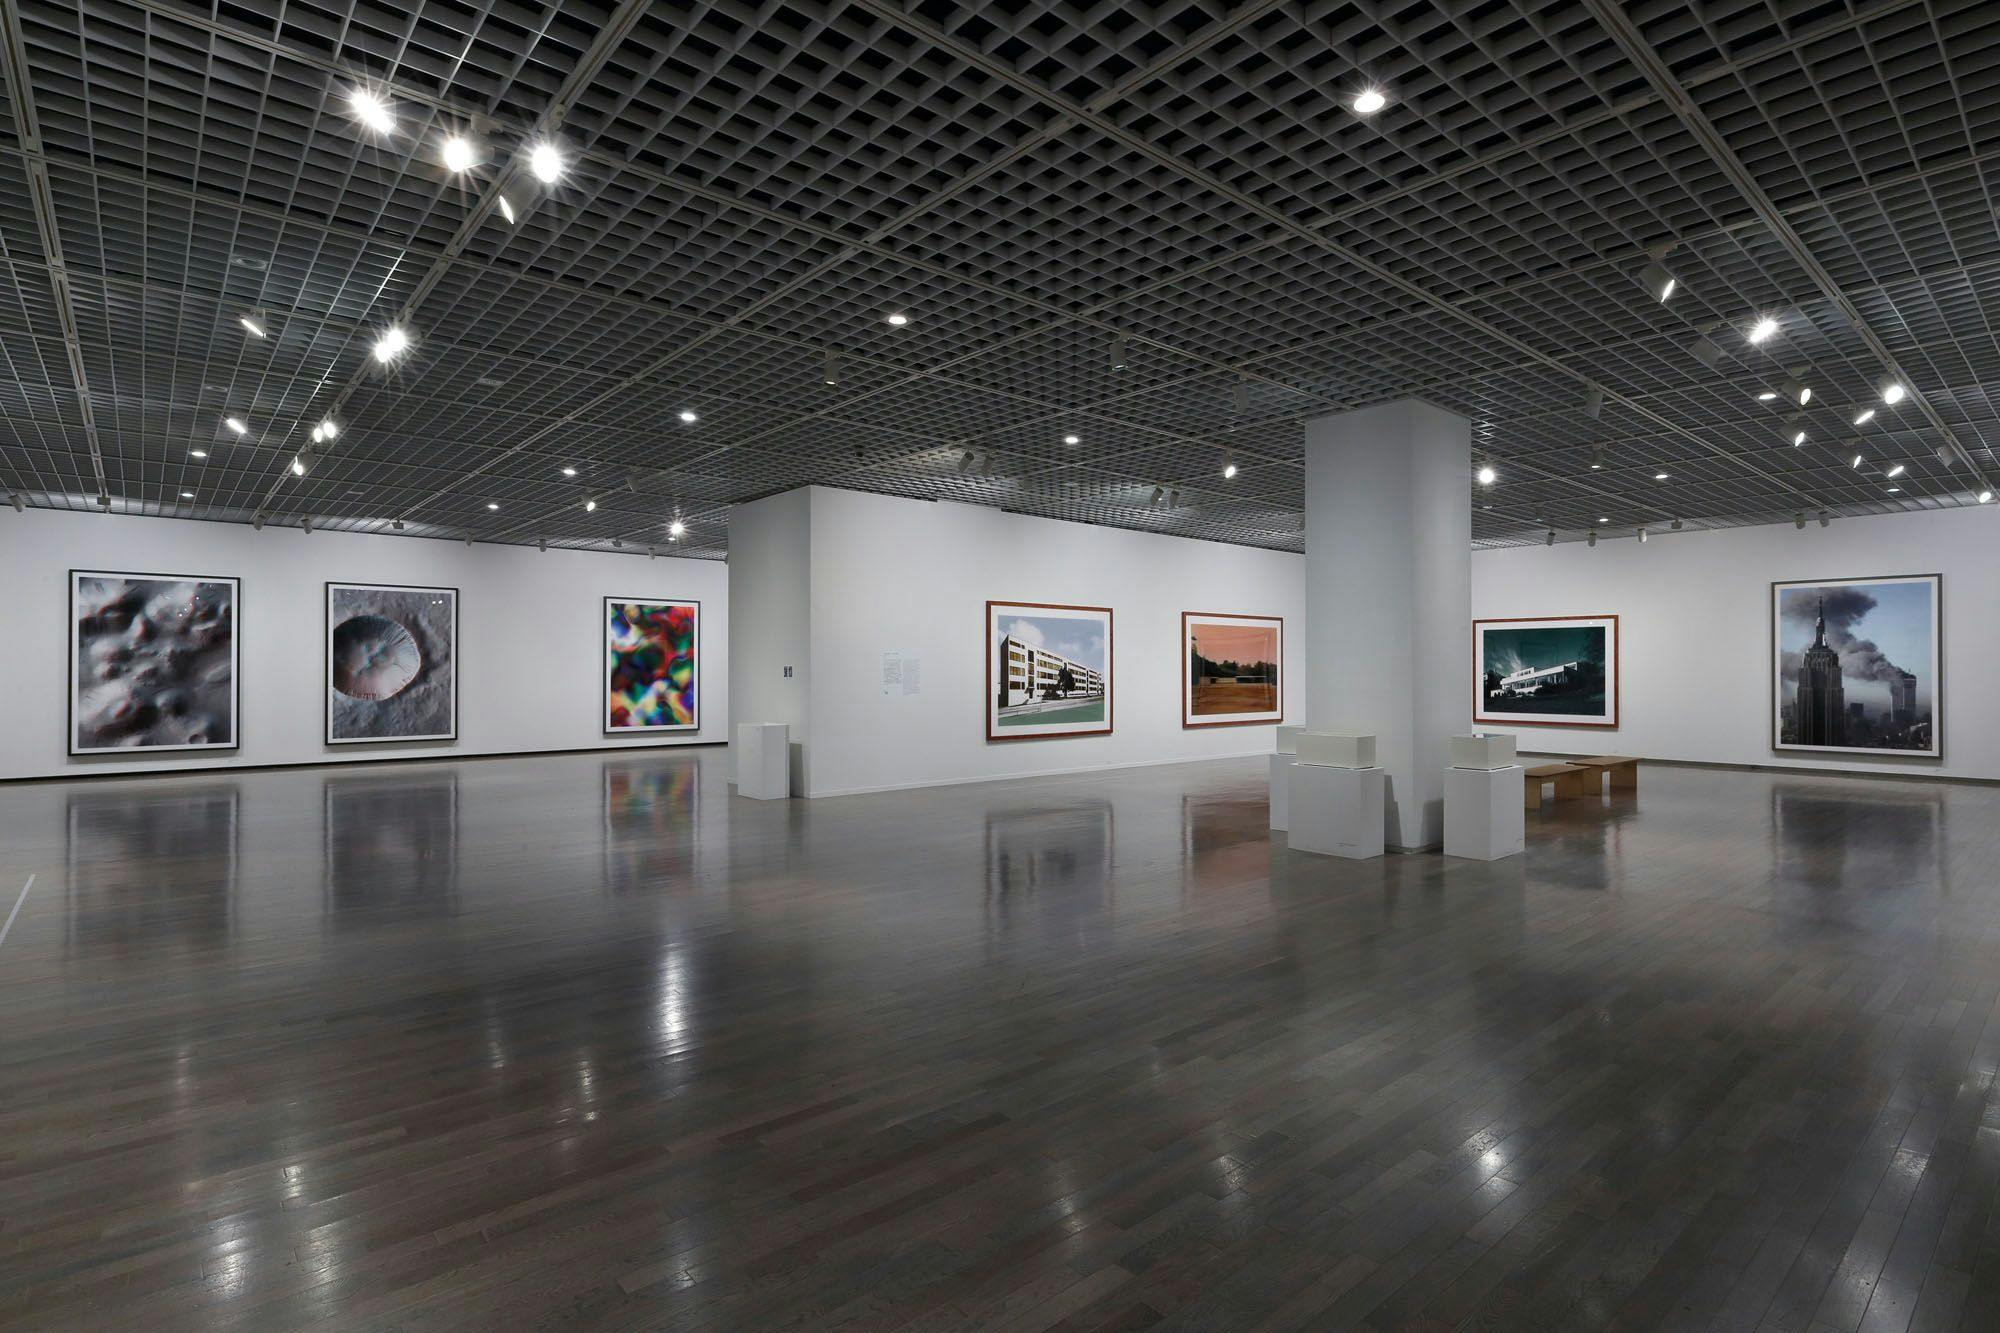 Installation view of the exhibition Thomas Ruff at The National Museum of Modern Art, Tokyo, dated 2016.